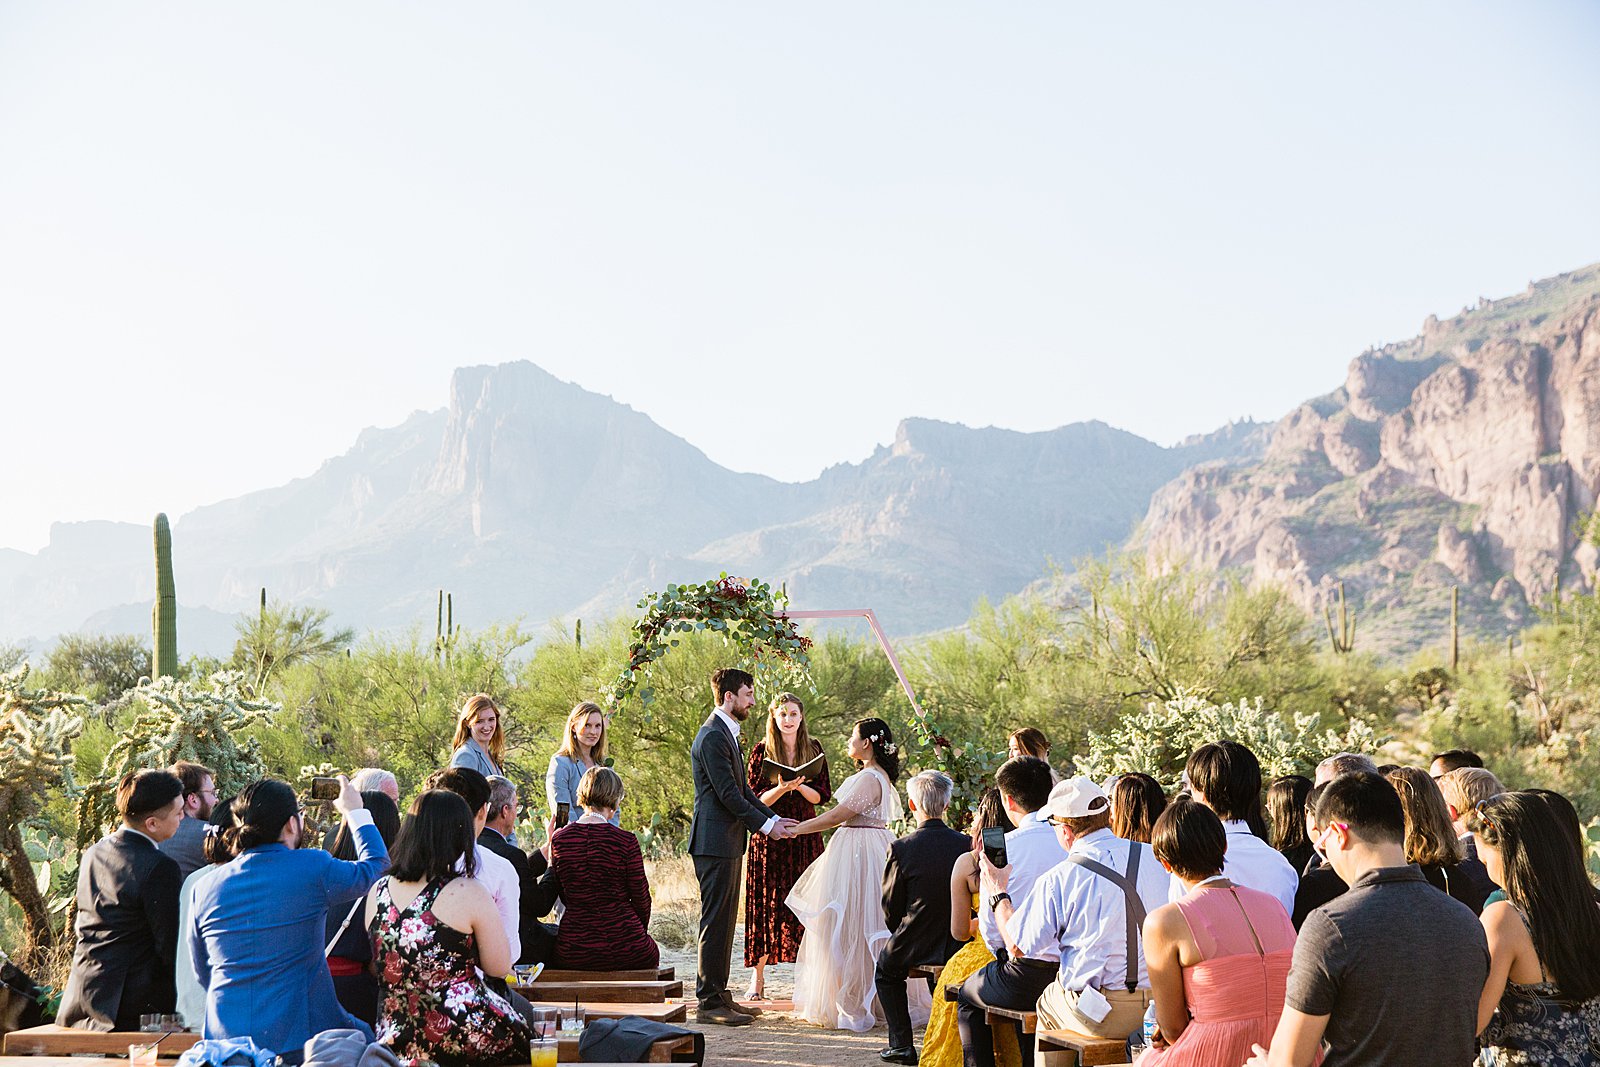 Wedding ceremony at a Cloth and Flame wedding in the Superstition Mountains by Phoenix wedding photographer PMA Photography.